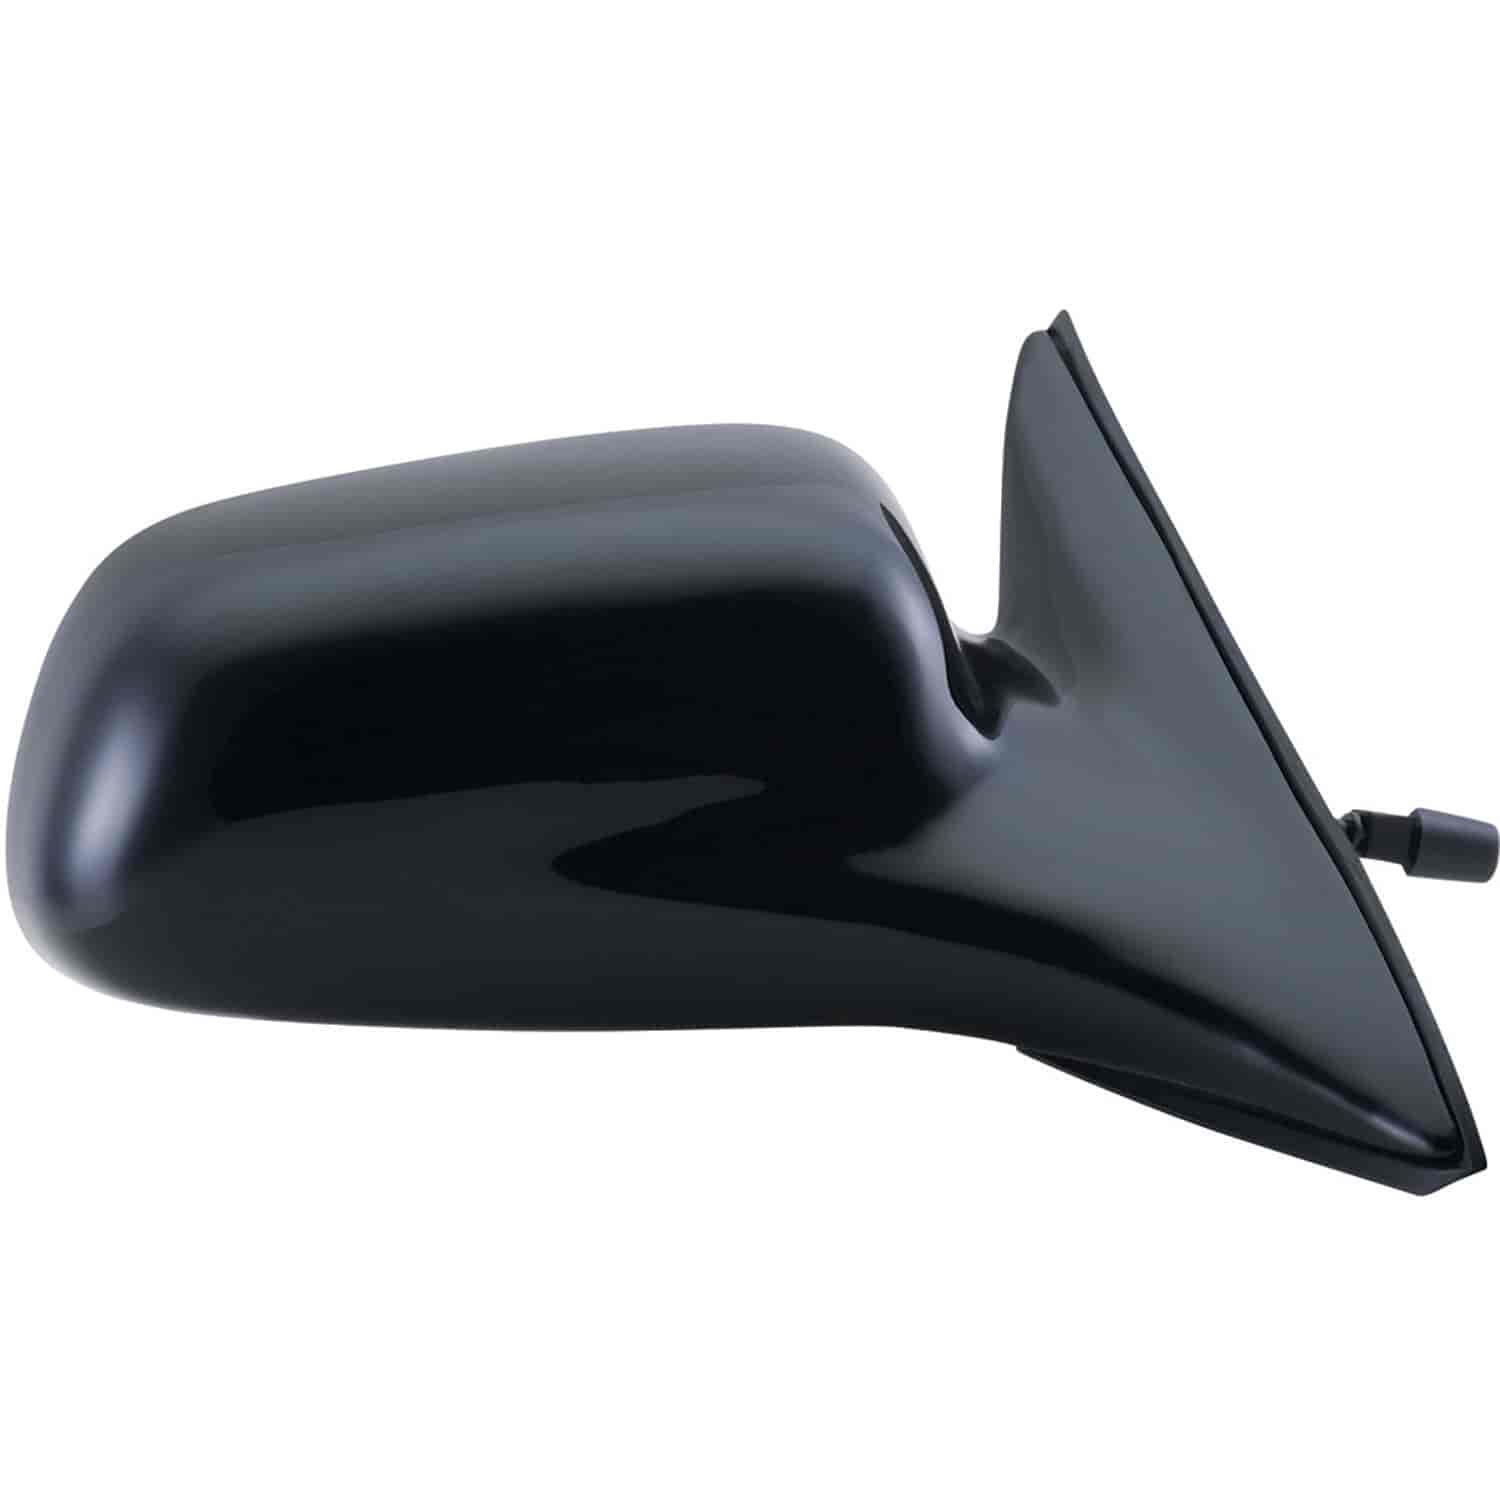 OEM Style Replacement mirror for 99-03 Mitsubishi Galant passenger side mirror tested to fit and fun